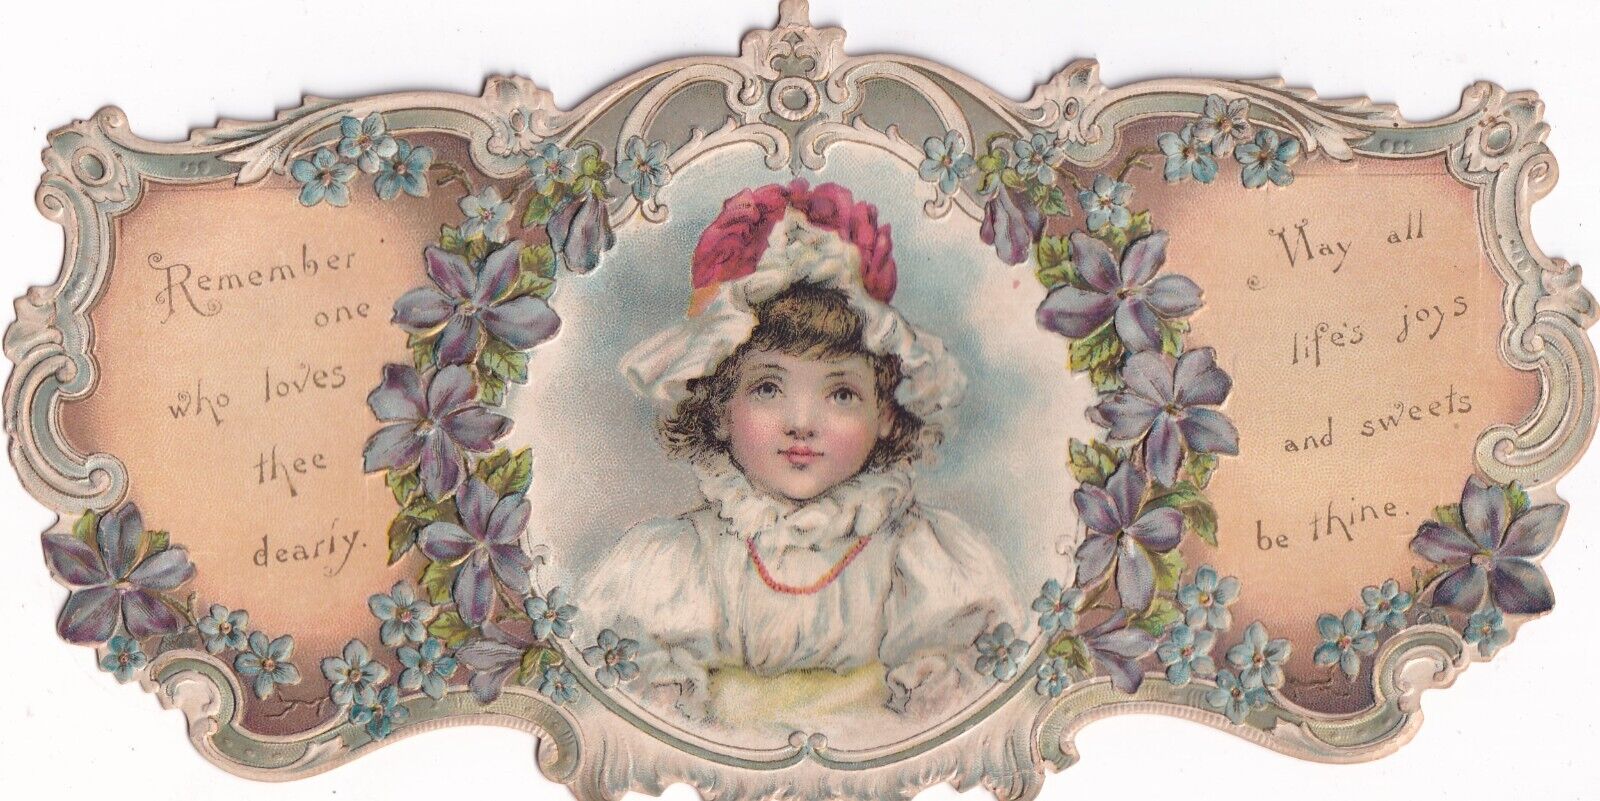 Large Embossed Victorian Card Die Cut Scrap -Cute Little Girl 4.25x8.25 inches